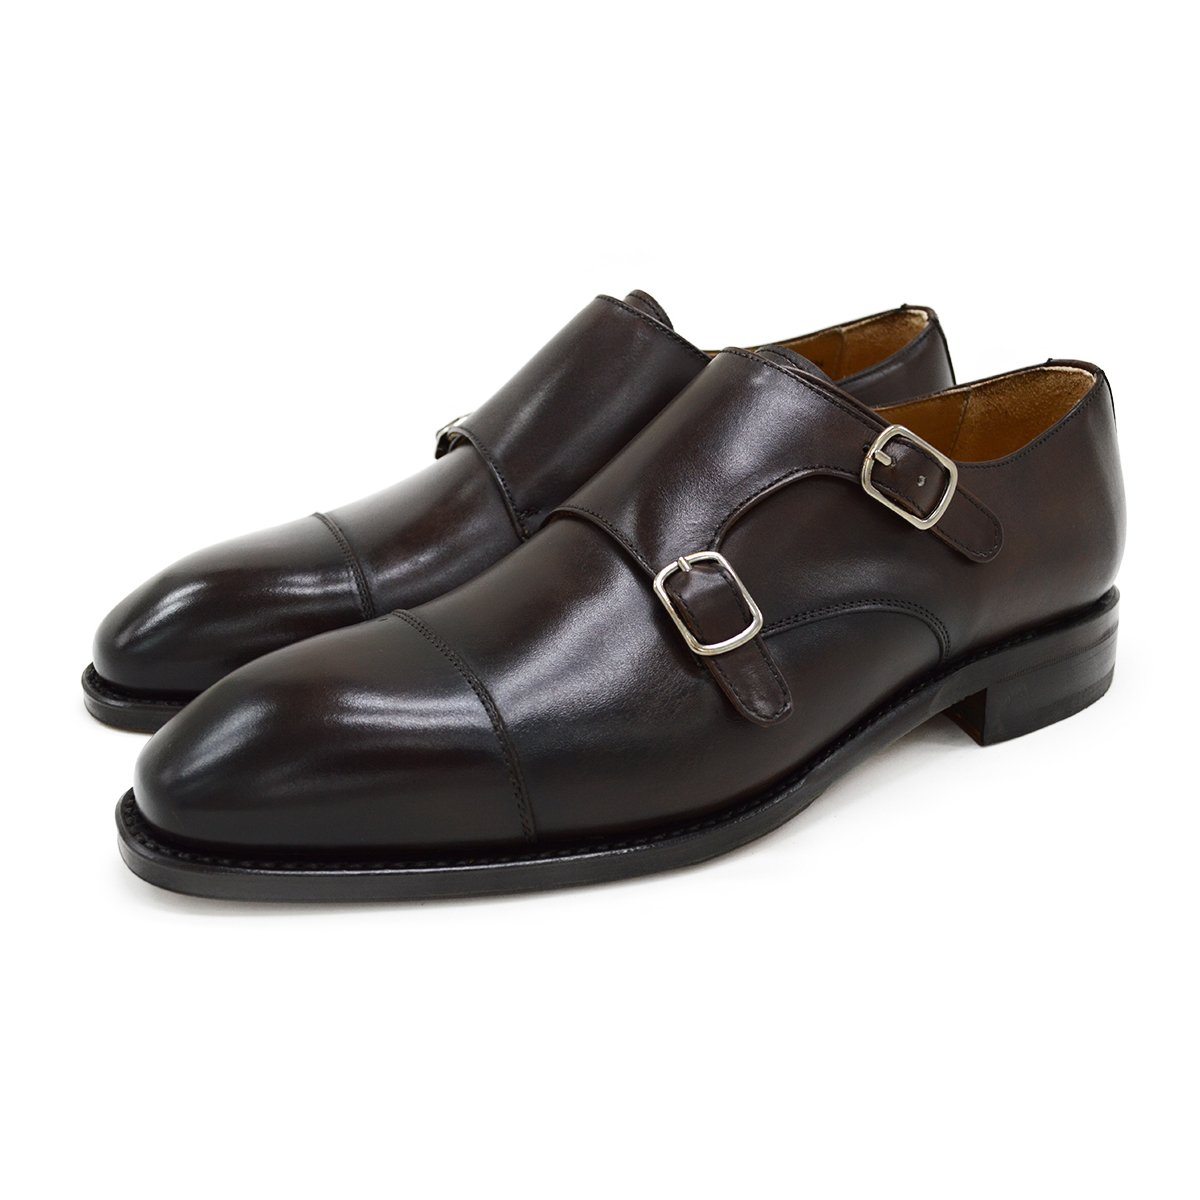 Berwick 1707 Double Monk (5212)-Dark Brown – A Fine Pair of Shoes